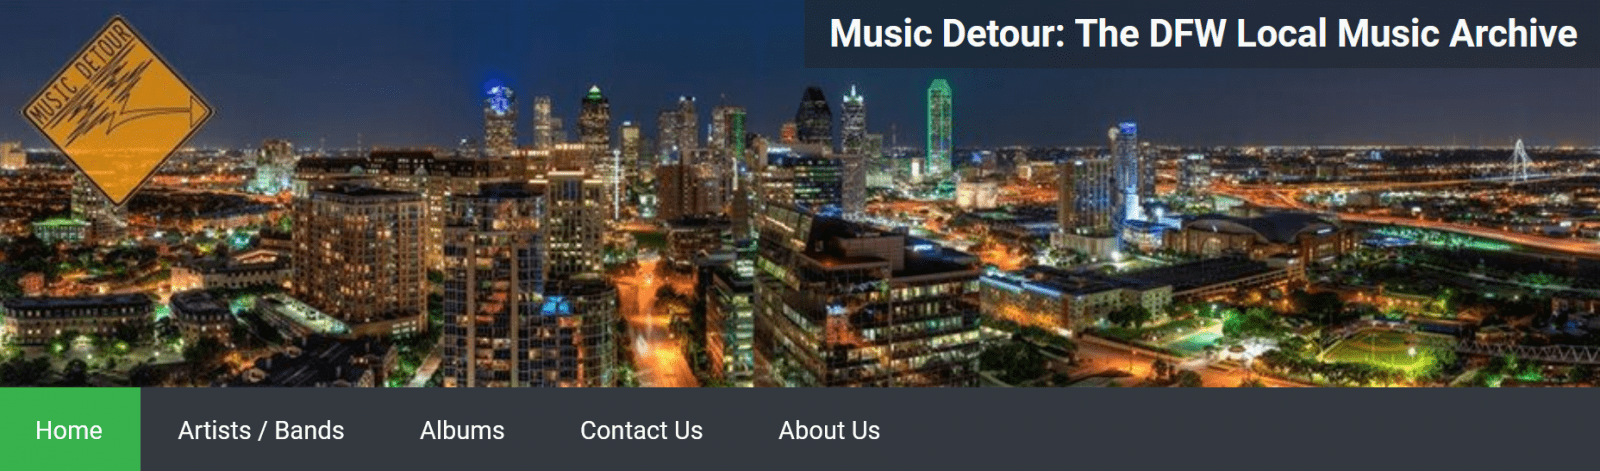 Music Detour website banner featuring Dallas skyline at night